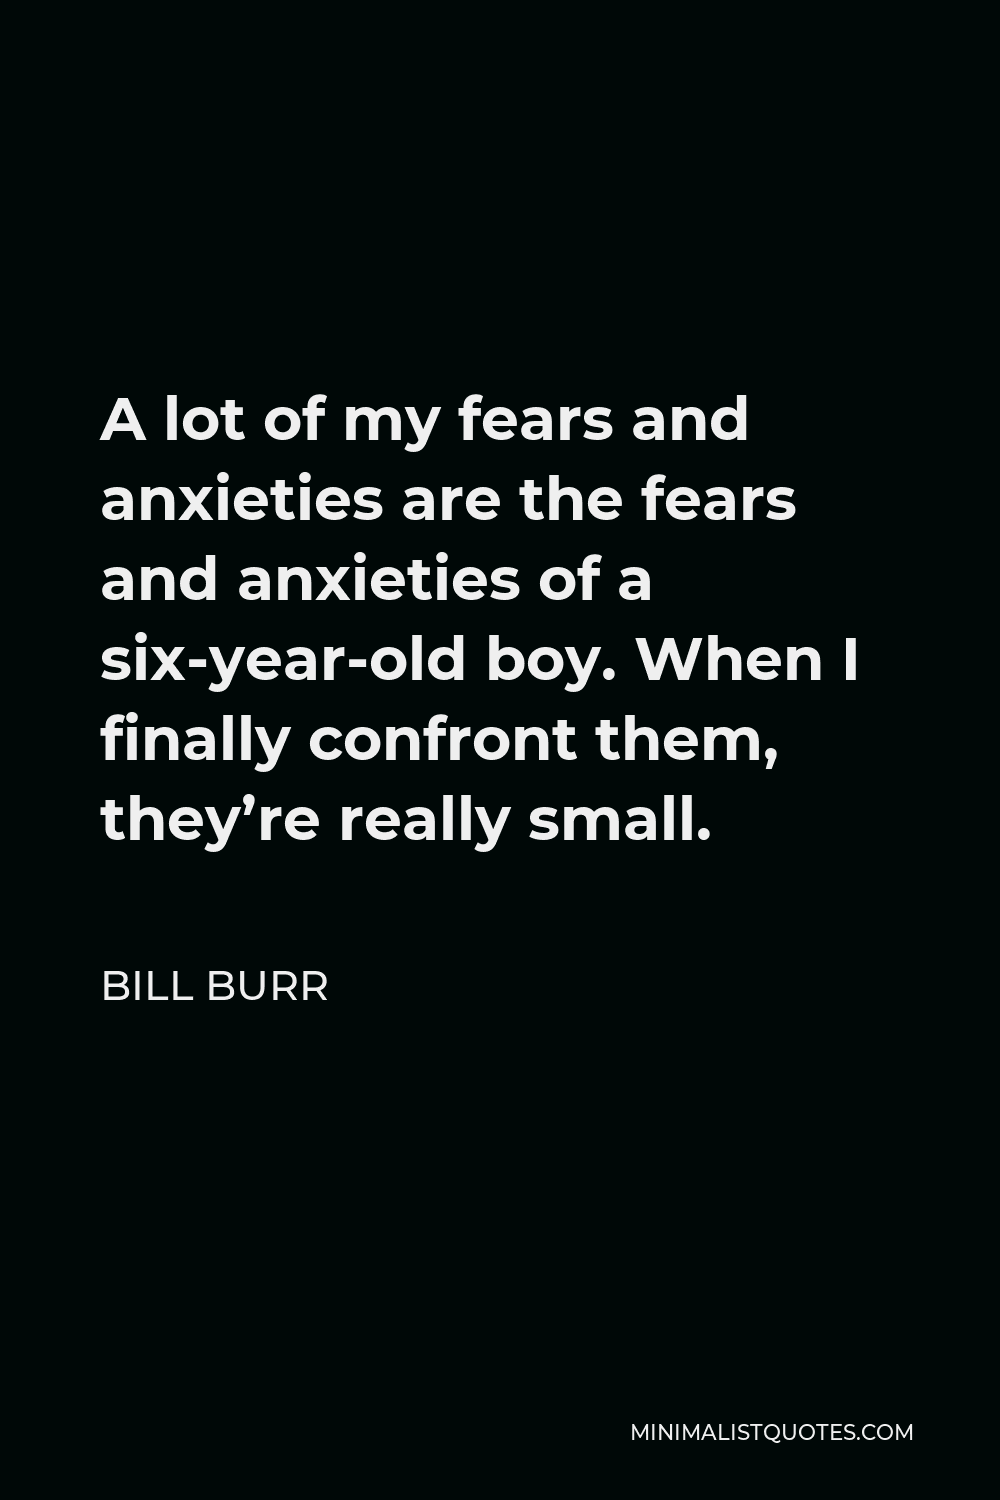 Bill Burr Quote - A lot of my fears and anxieties are the fears and anxieties of a six-year-old boy. When I finally confront them, they’re really small.